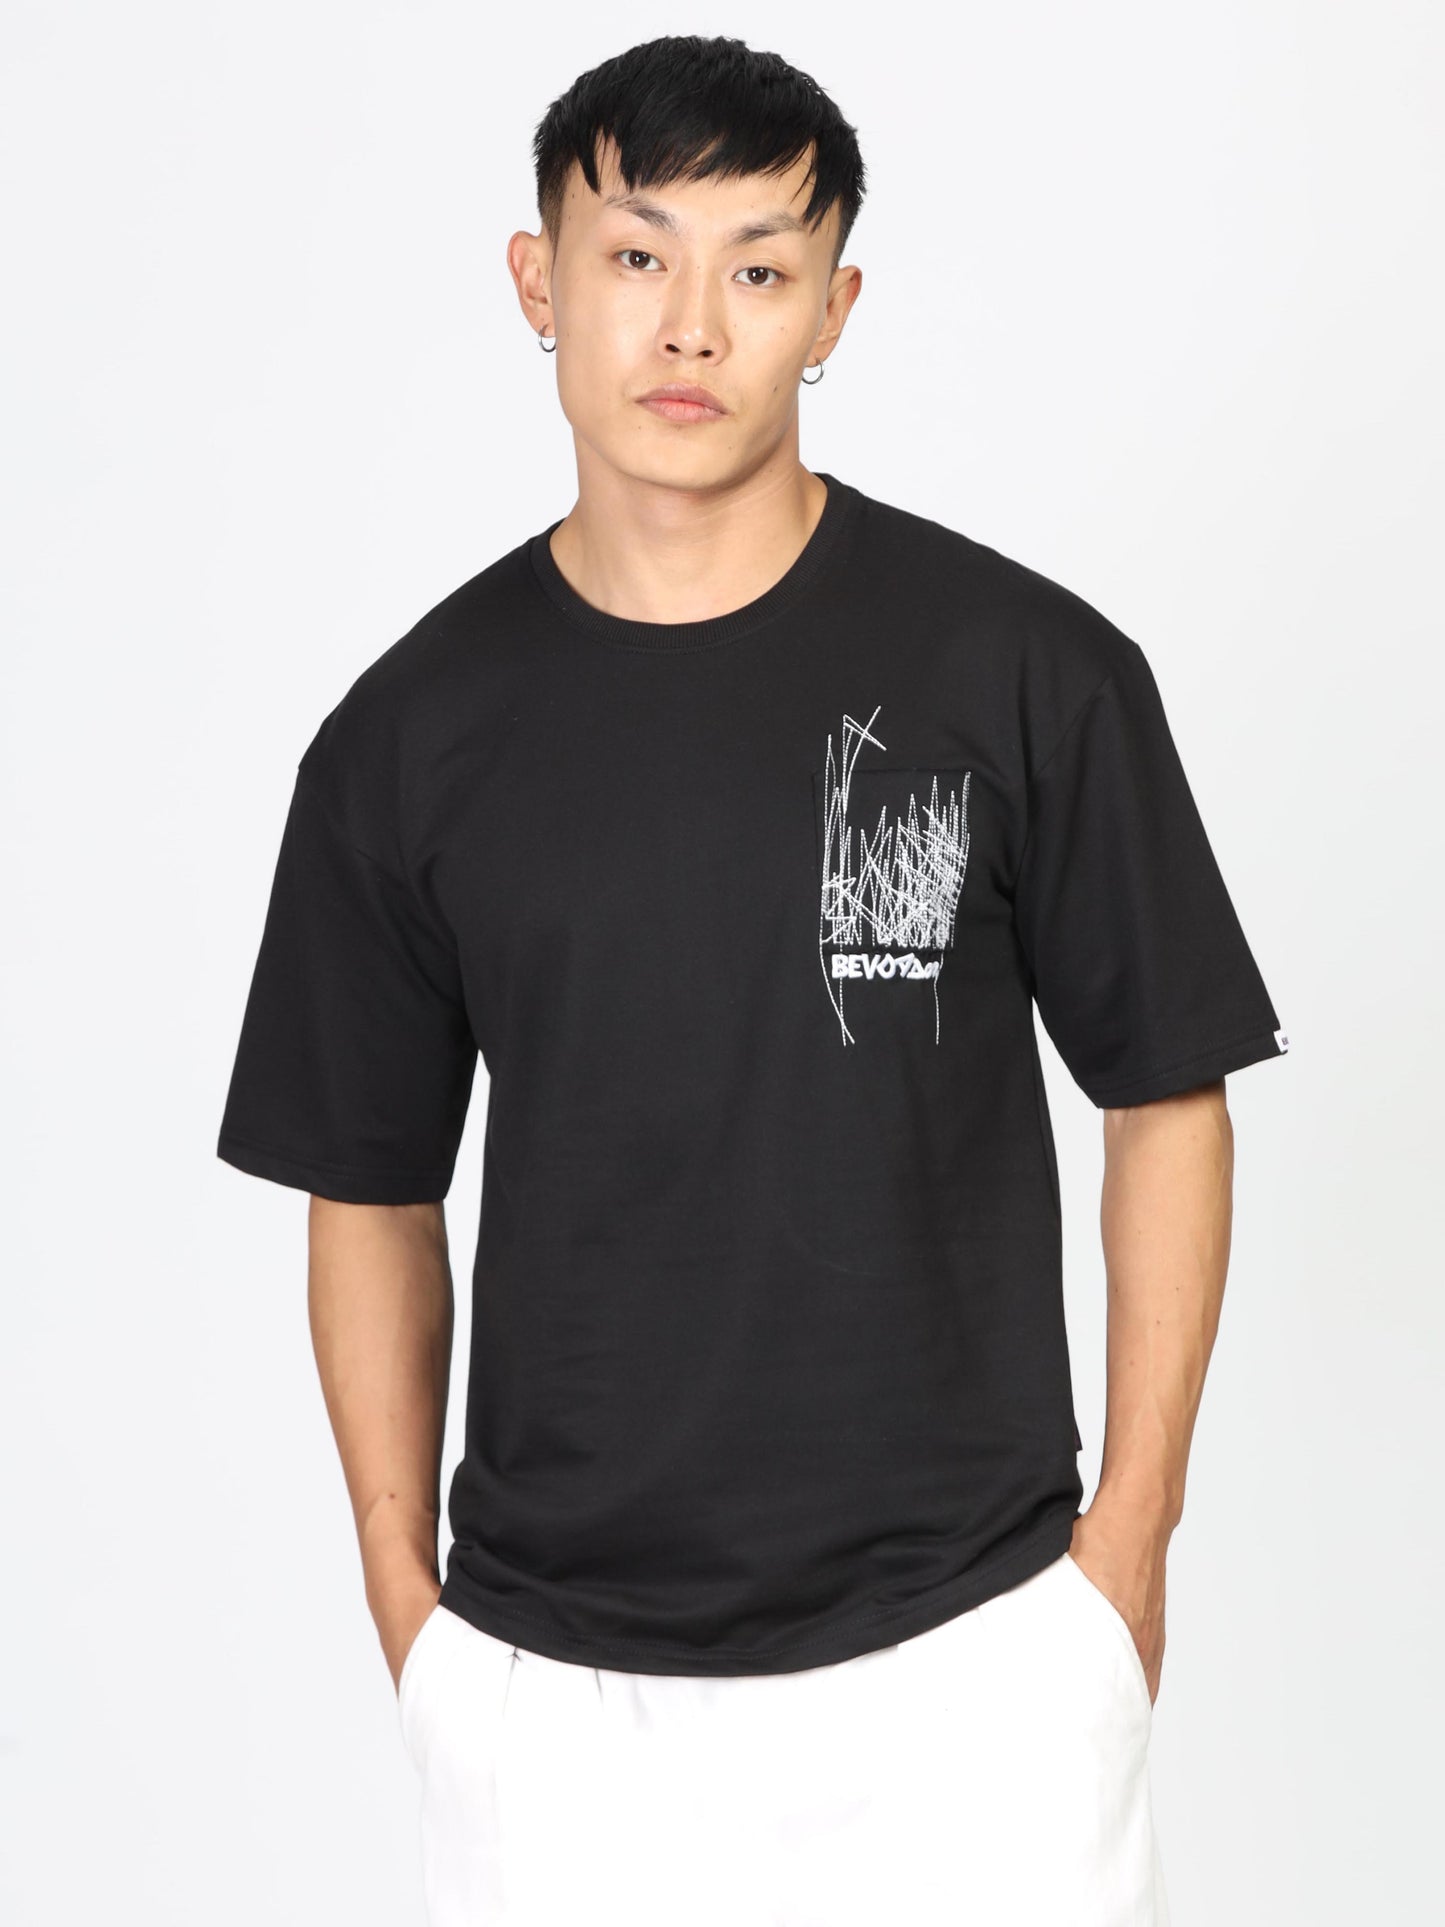 Comfortable Black Embroidered T Shirt for Men